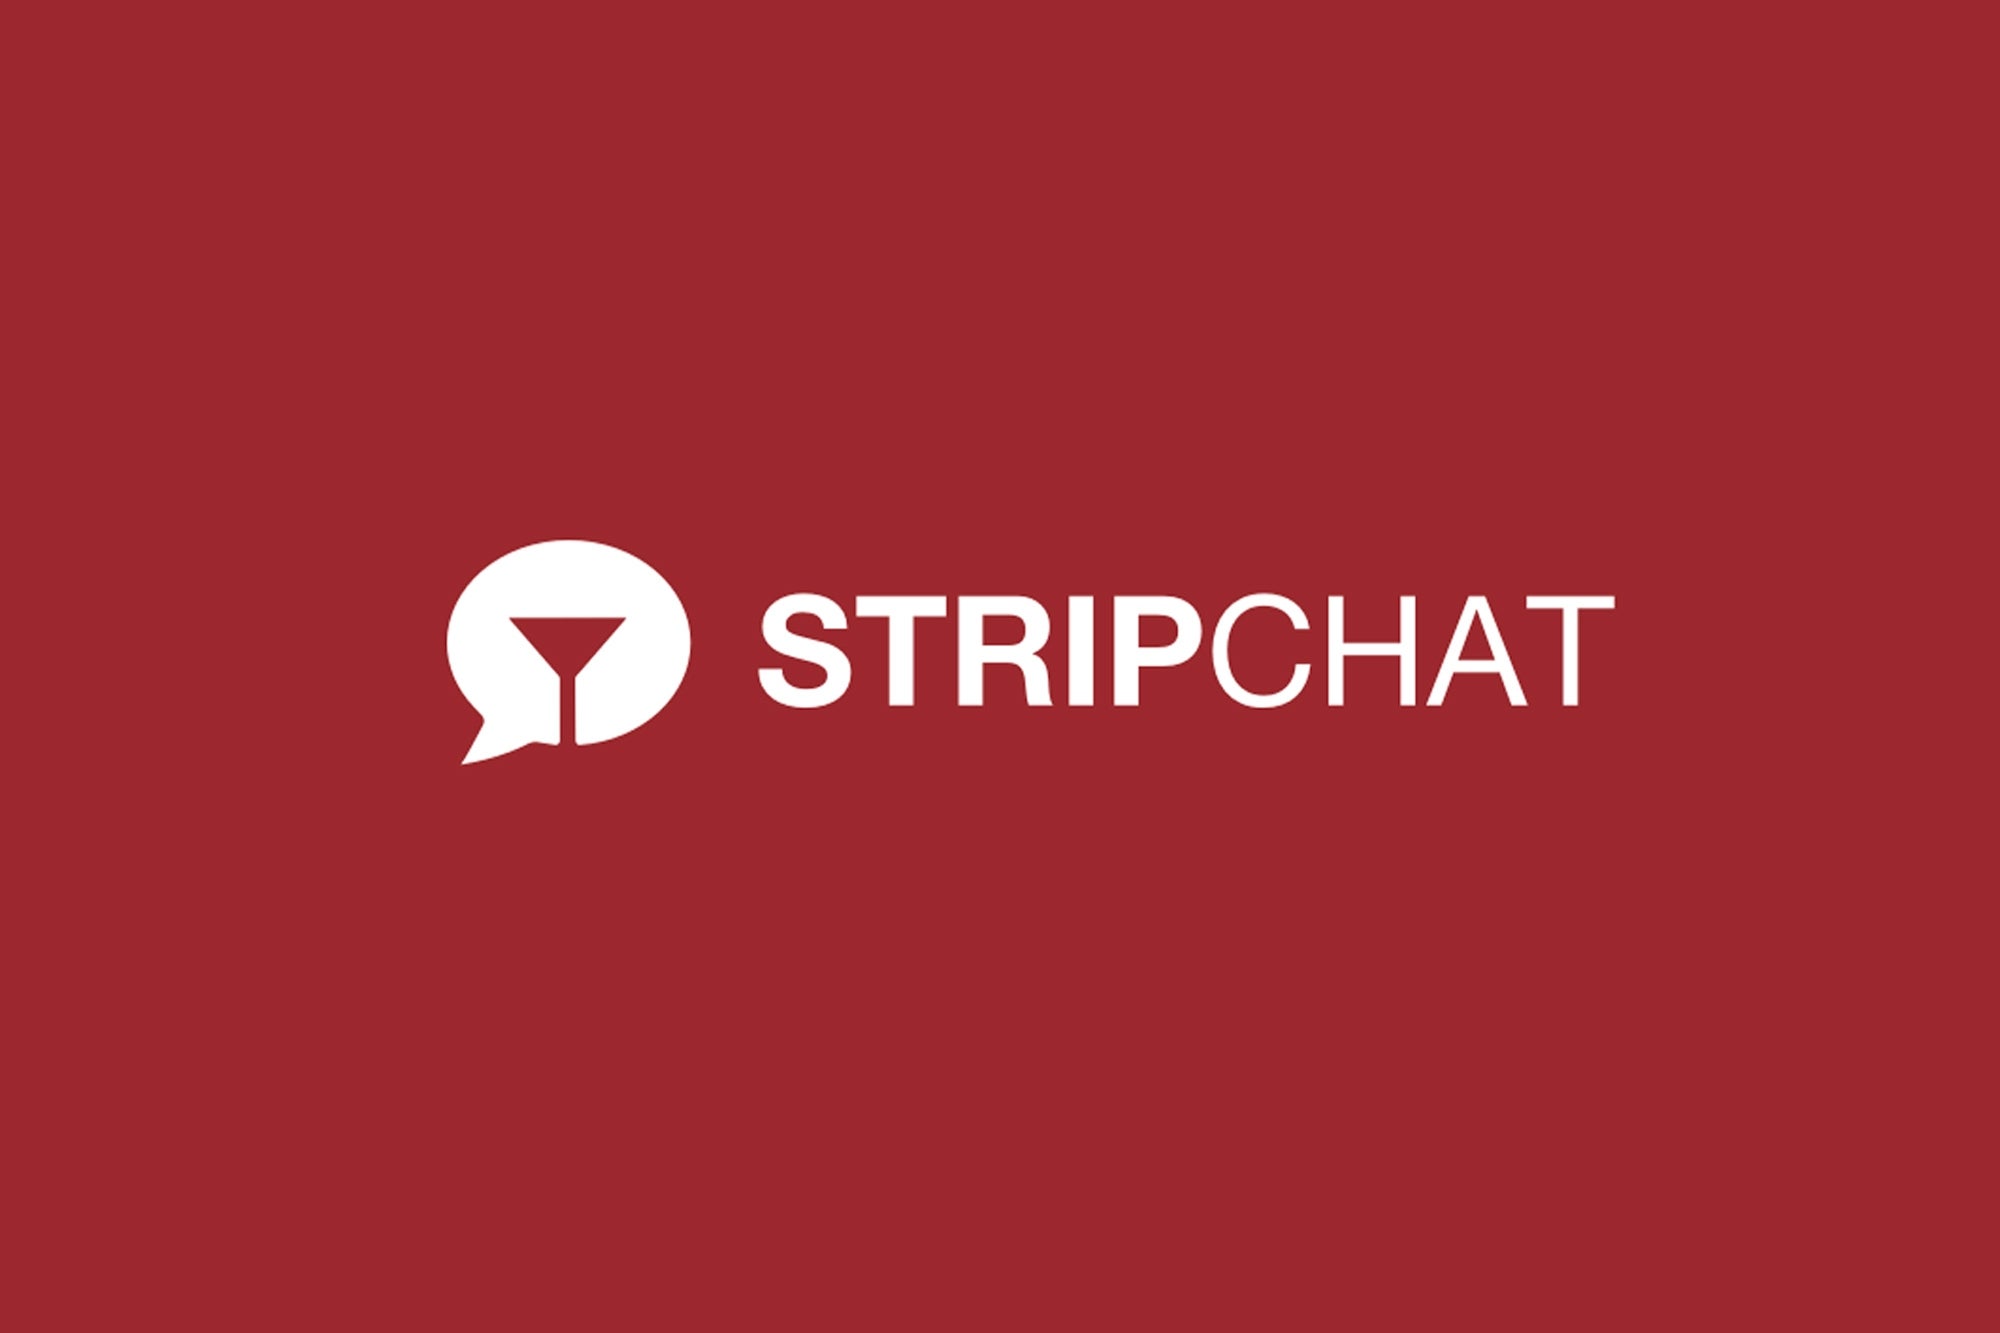 Strip chat.red